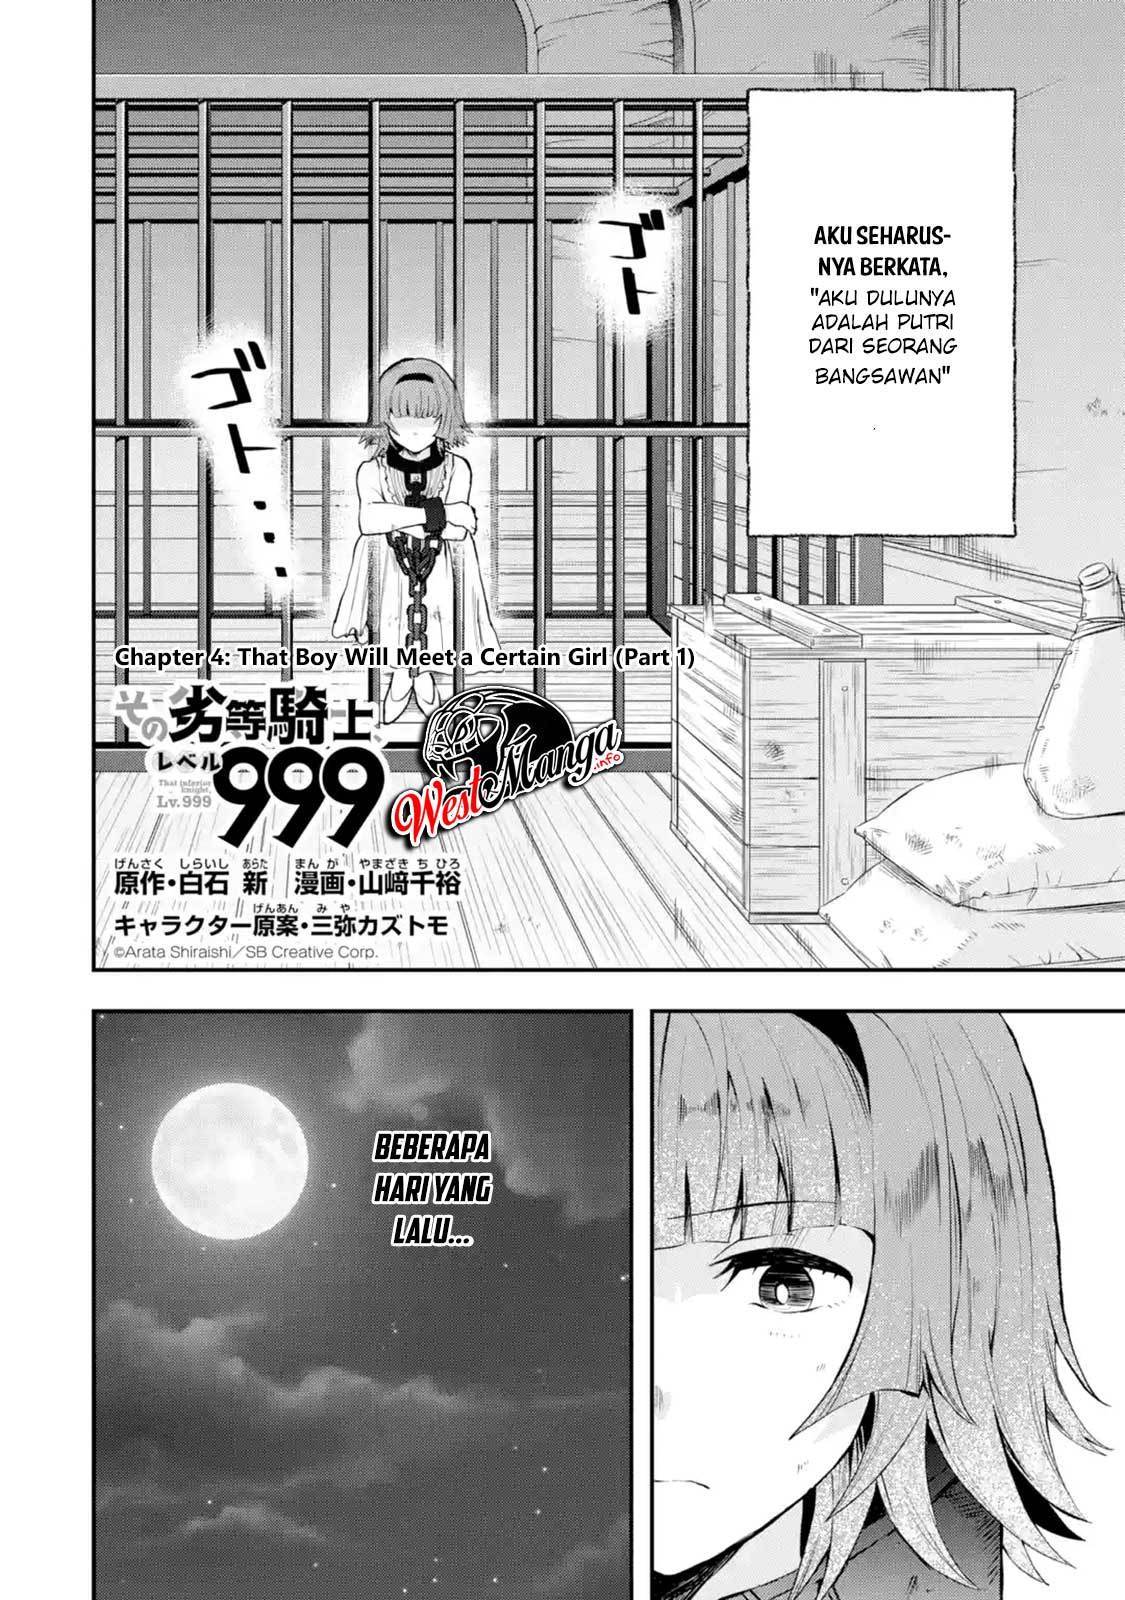 That Inferior Knight Actually Level 999 Chapter 04.1